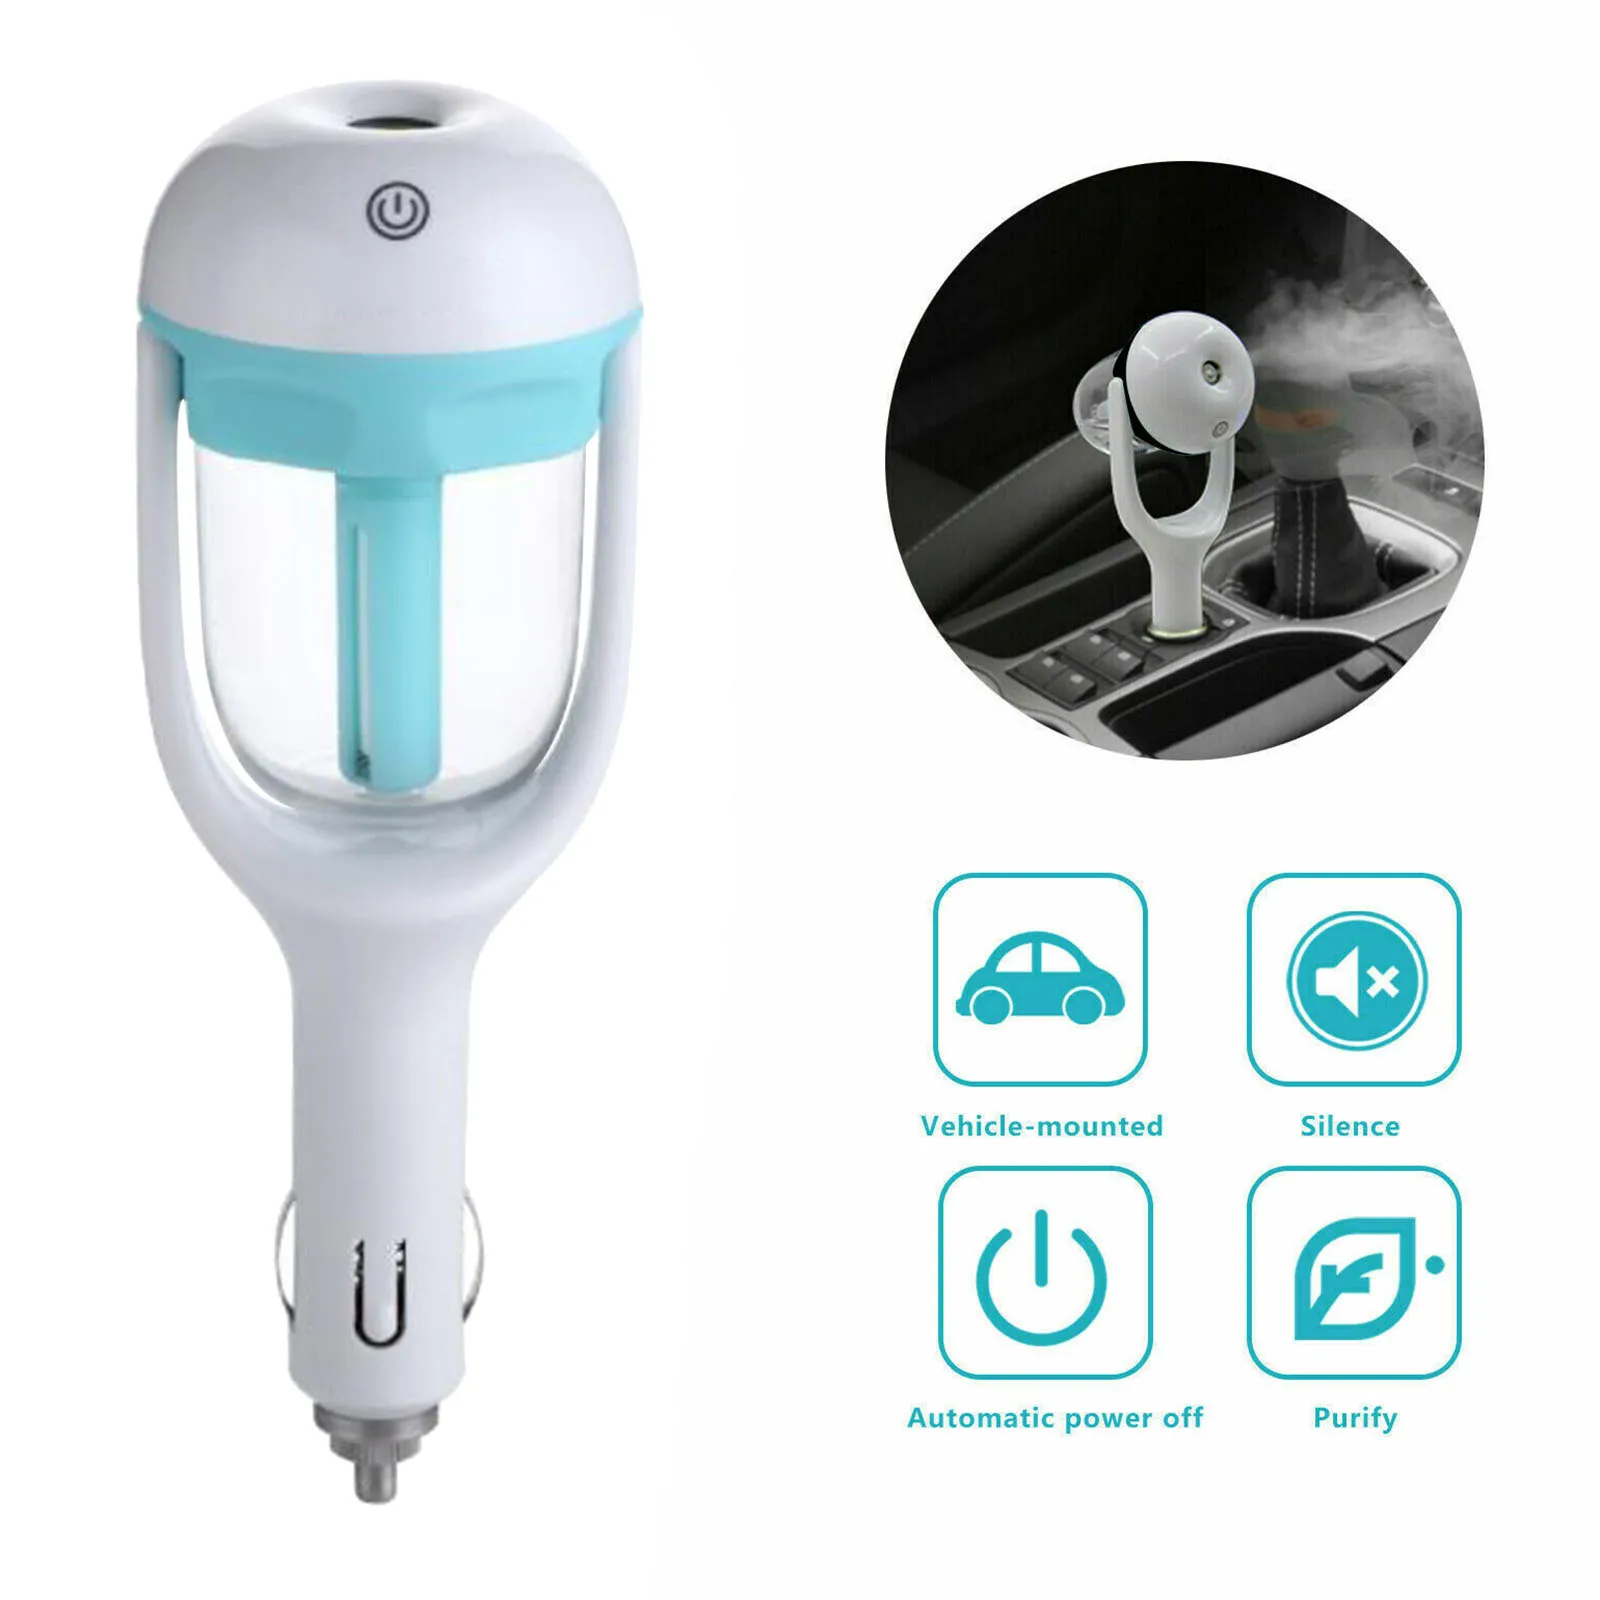 12V Car Air freshener Mini Car Humidifier Air Purifier Aroma and Essential oil diffuser car Aromatherapy Mist Maker